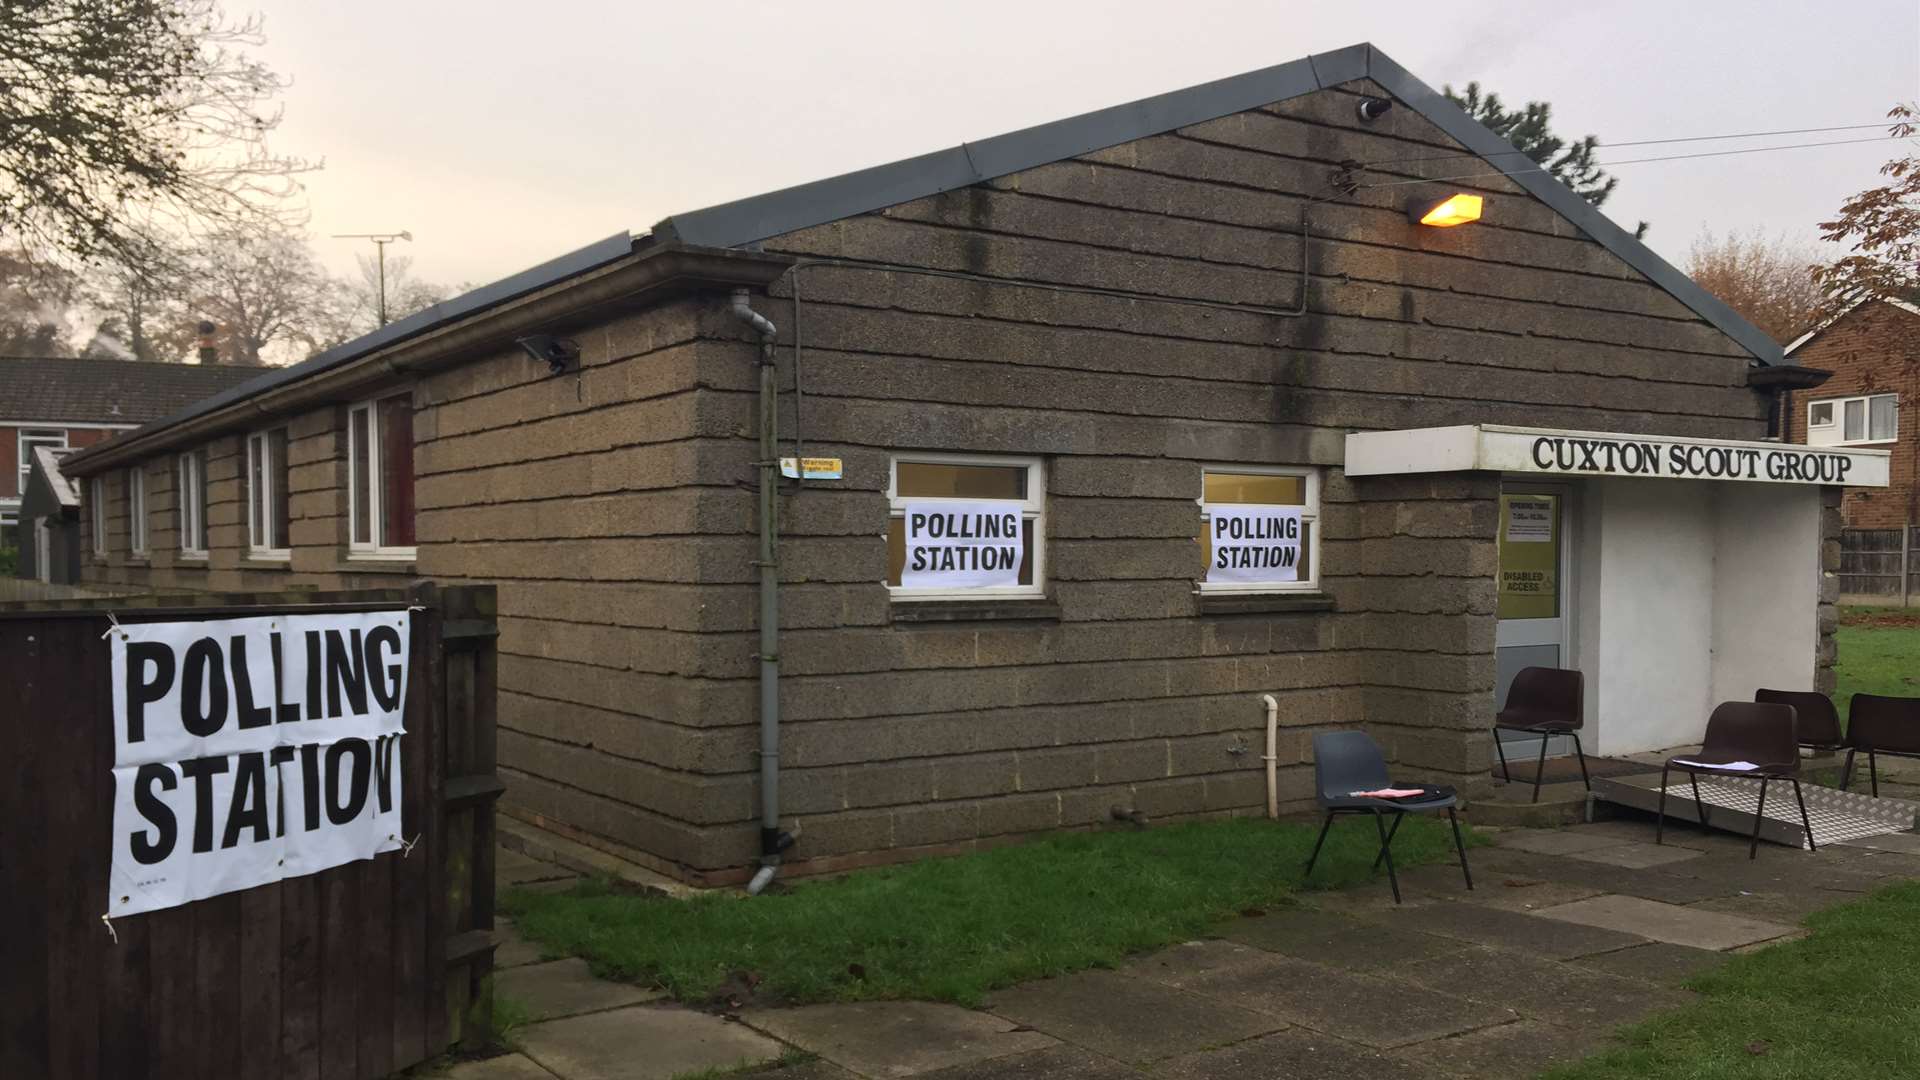 The polling stations have closed